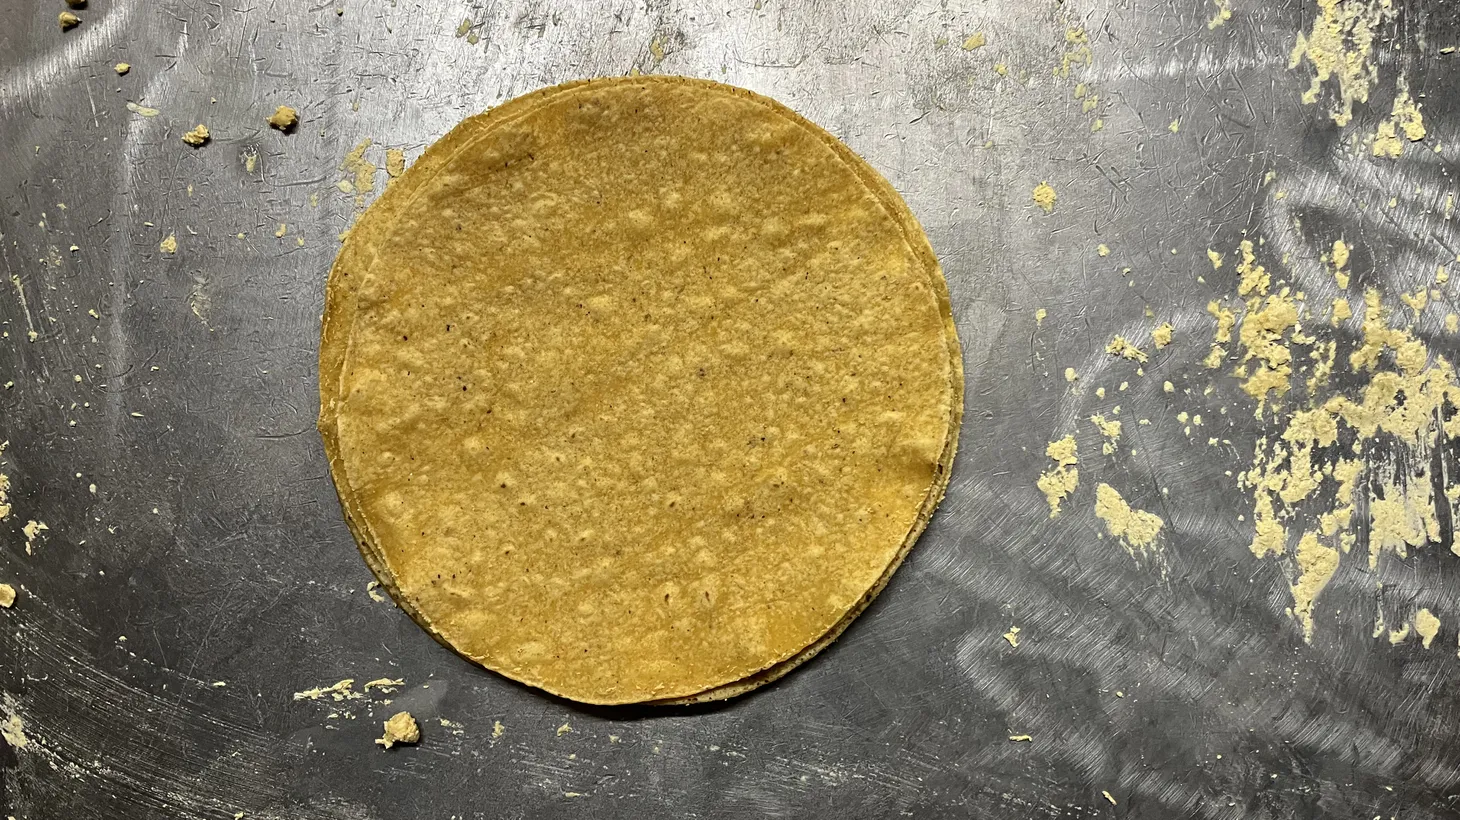 Yellow corn tortillas, with a rich and nutty flavor, are more stable than blue corn varieties.